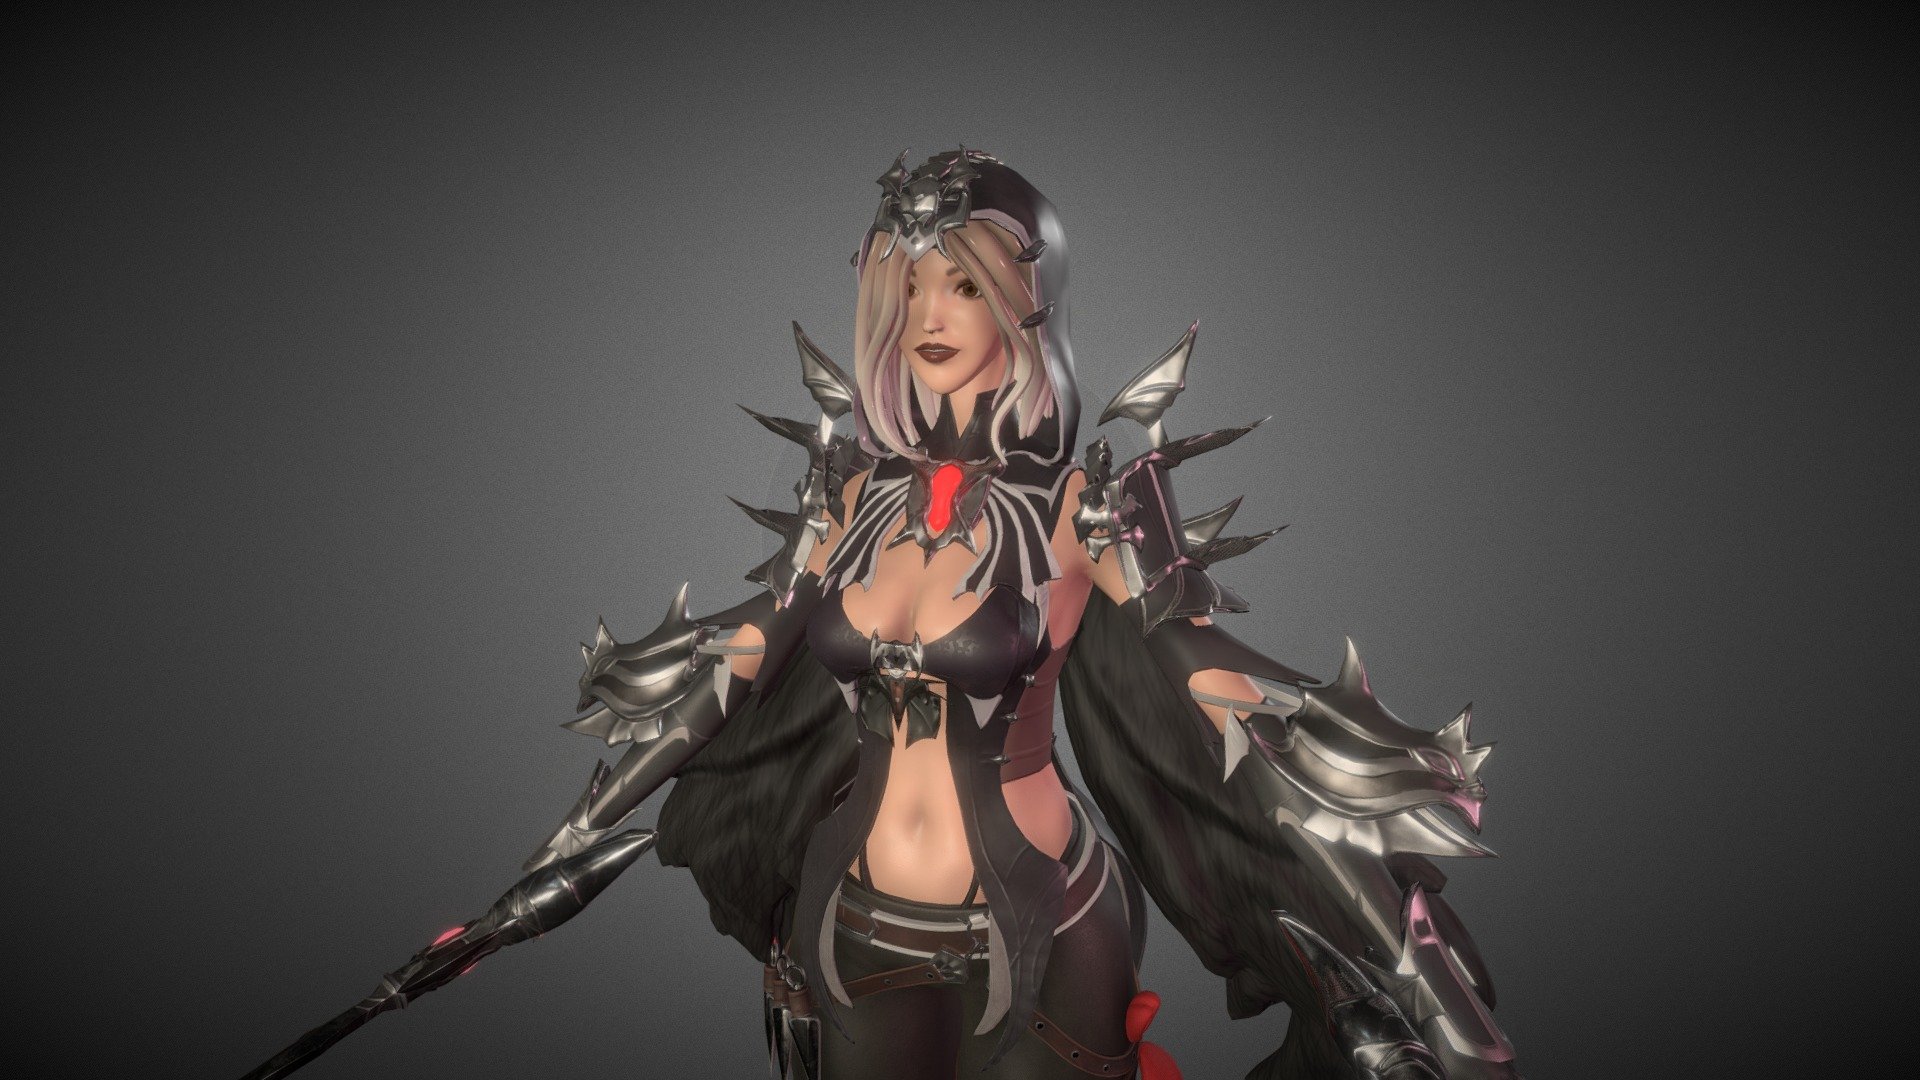 Assassin lady asset ready for game 3d model